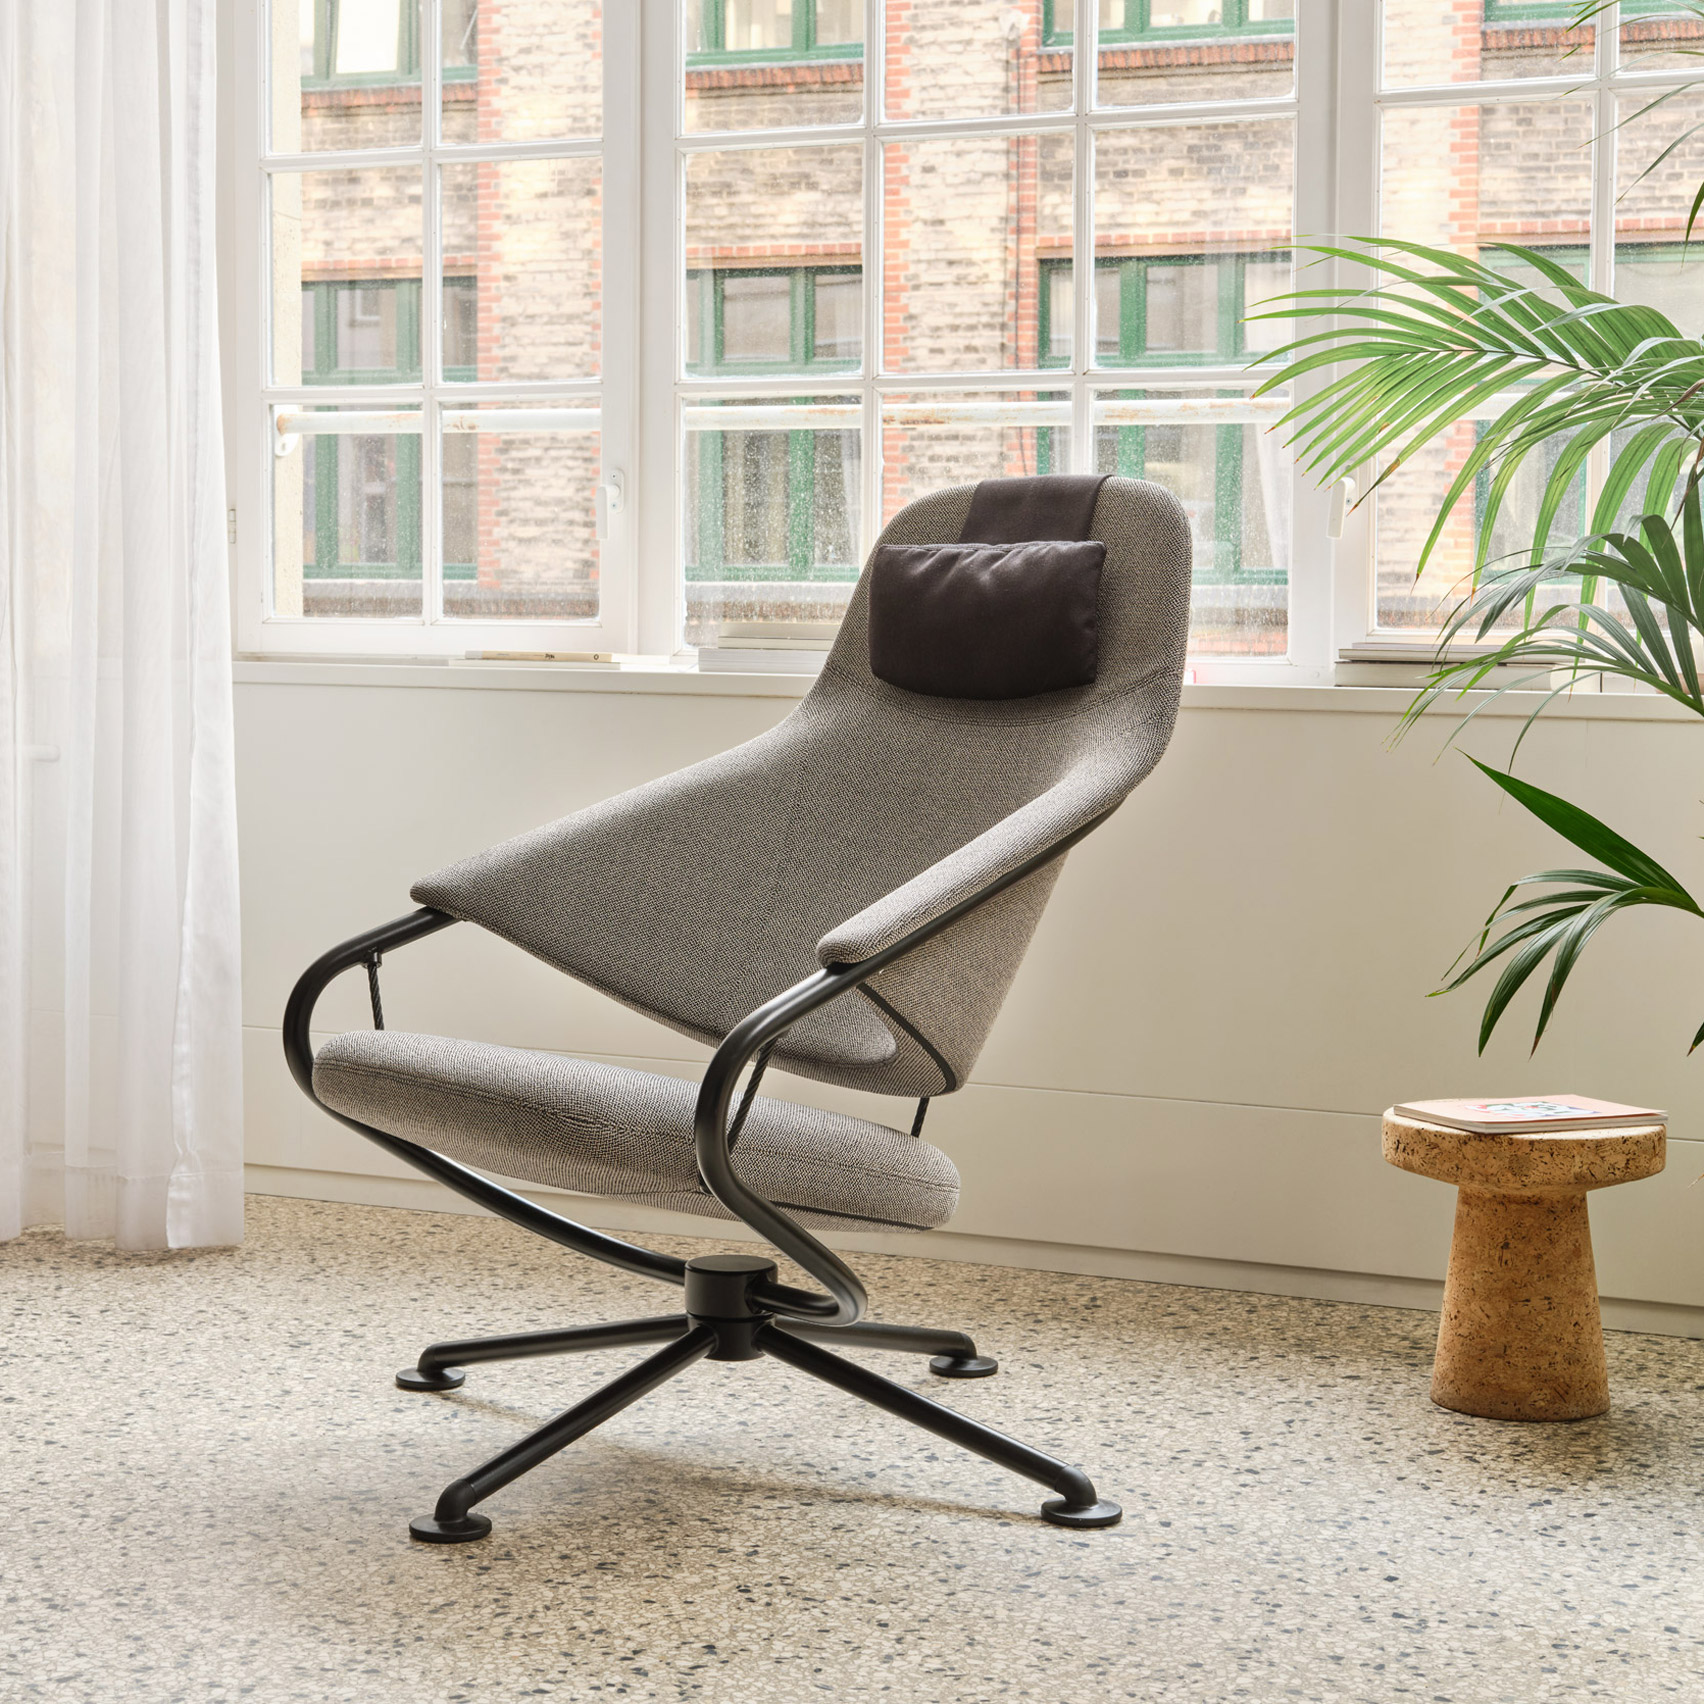 Citizen lounge chair by Konstantin Grcic for Vitra